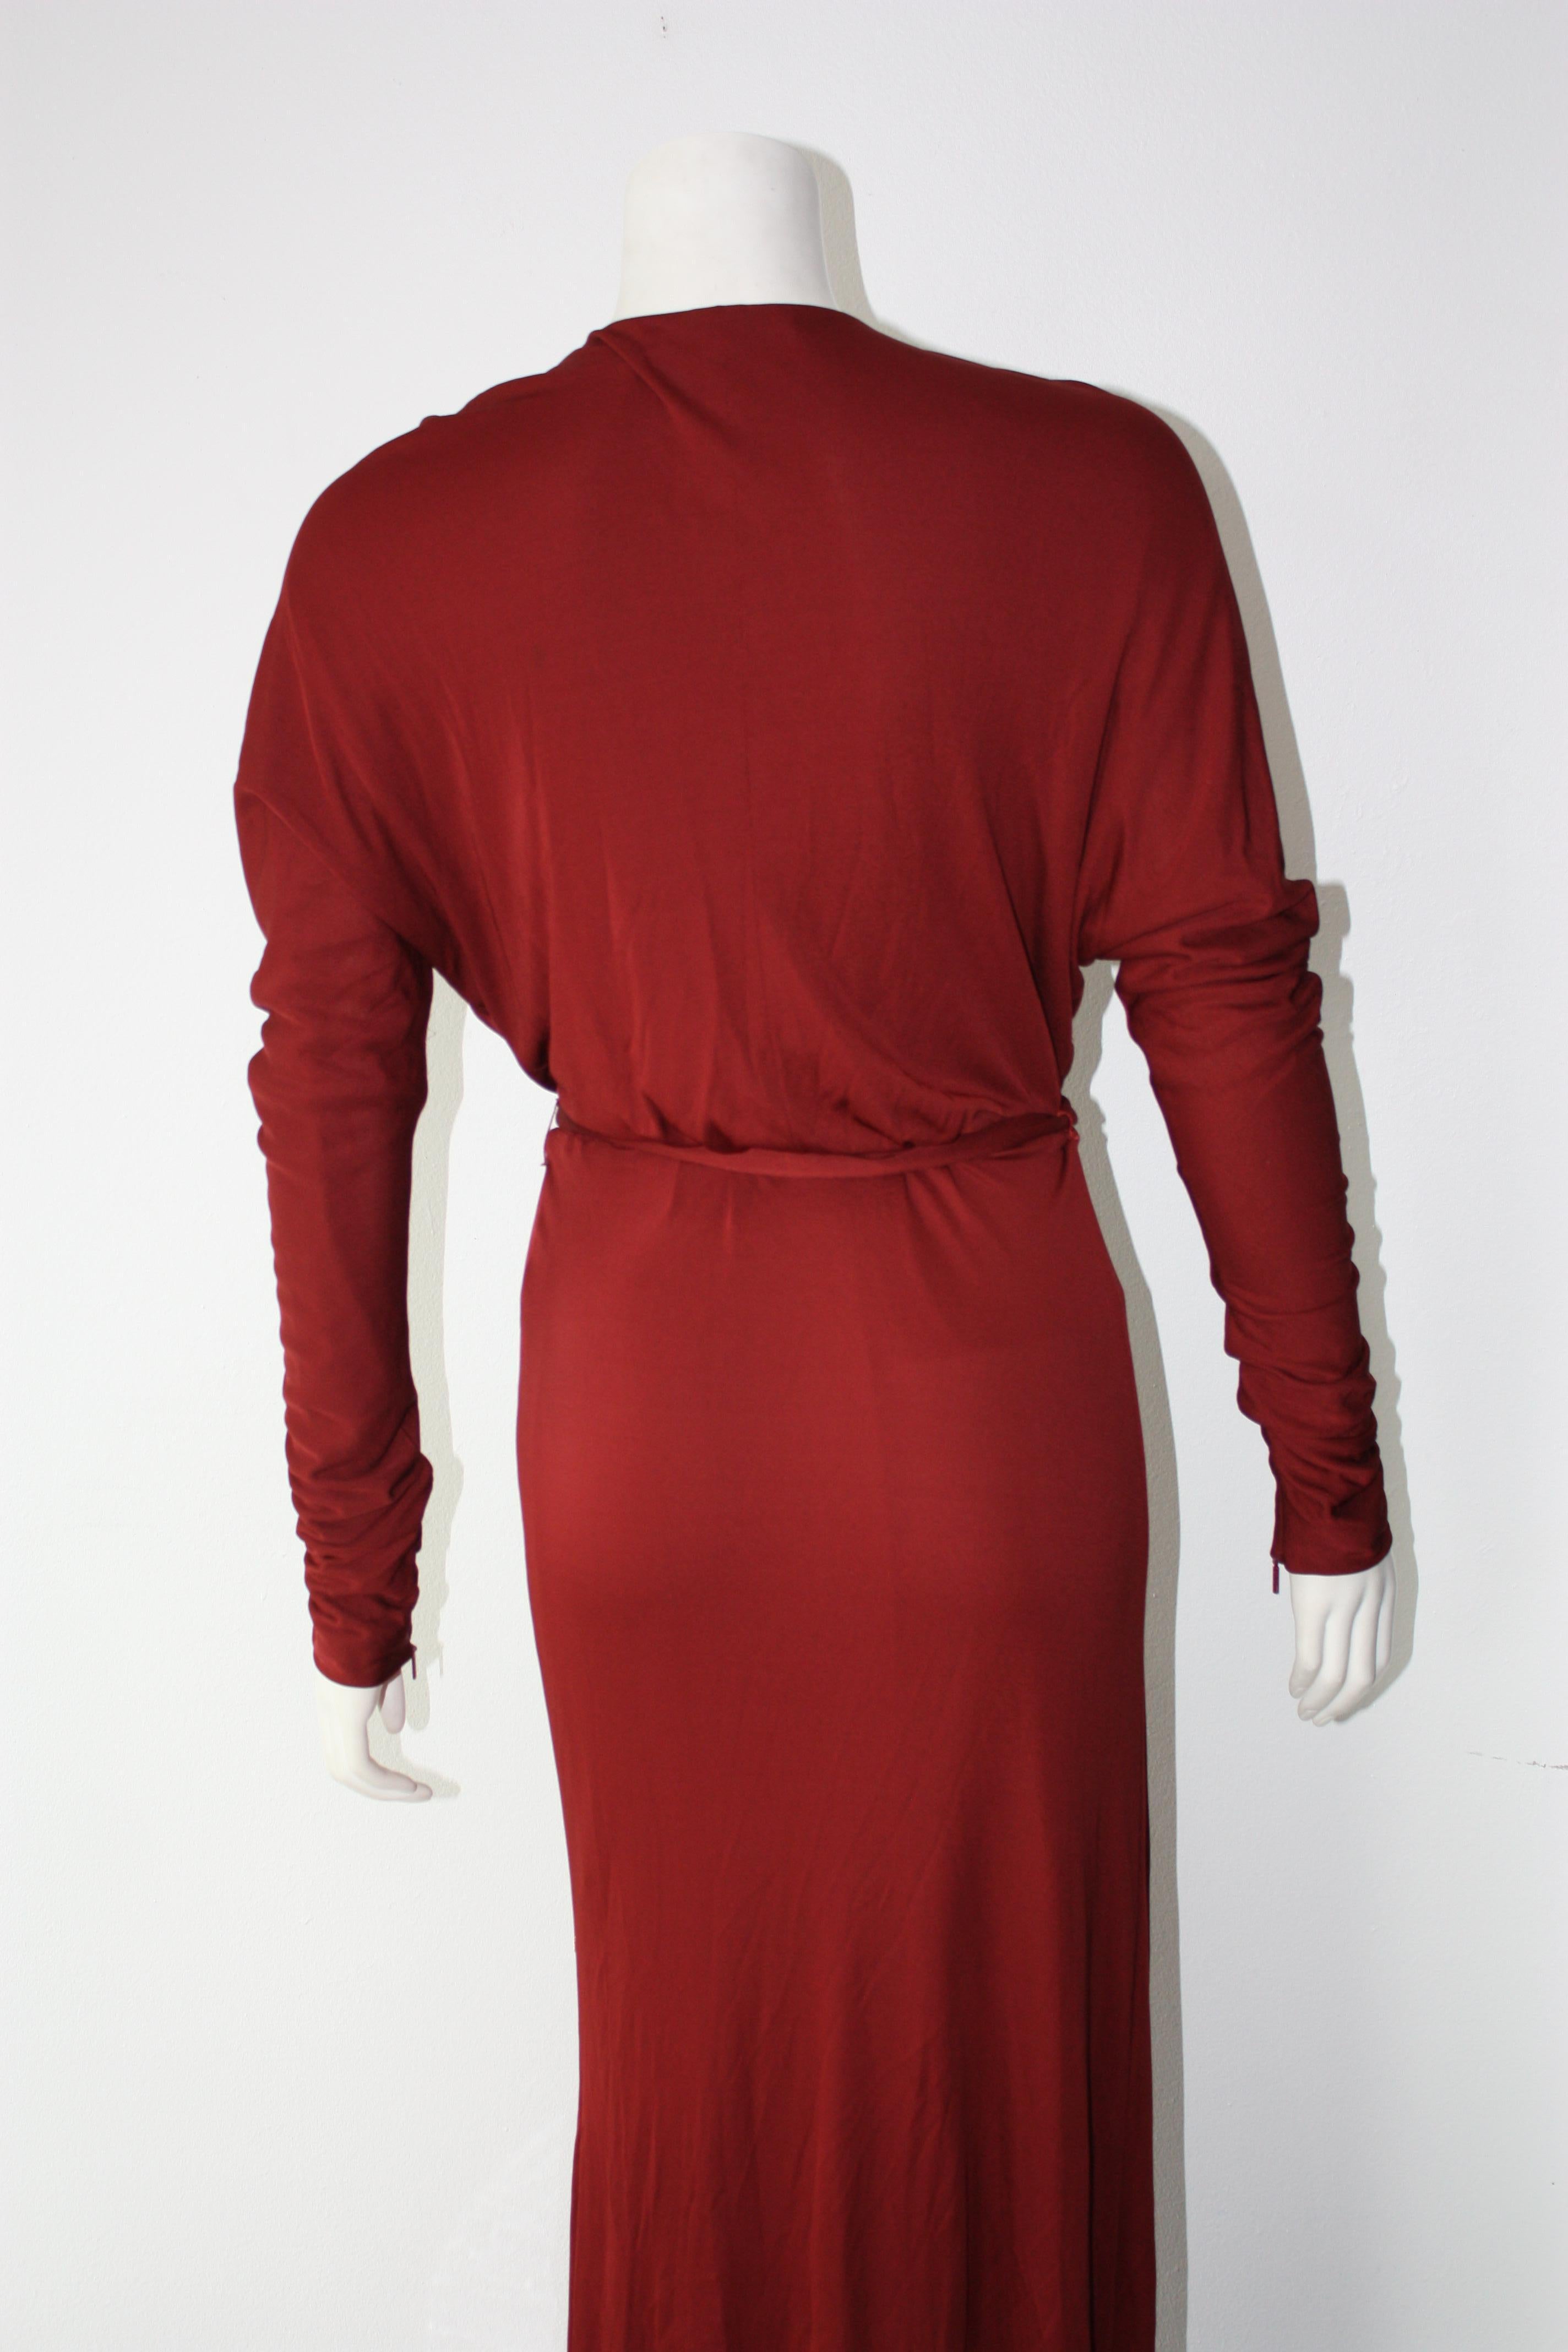 GUCCI Tom Ford Burgundy Wrap Gown  In Excellent Condition For Sale In Thousand Oaks, CA